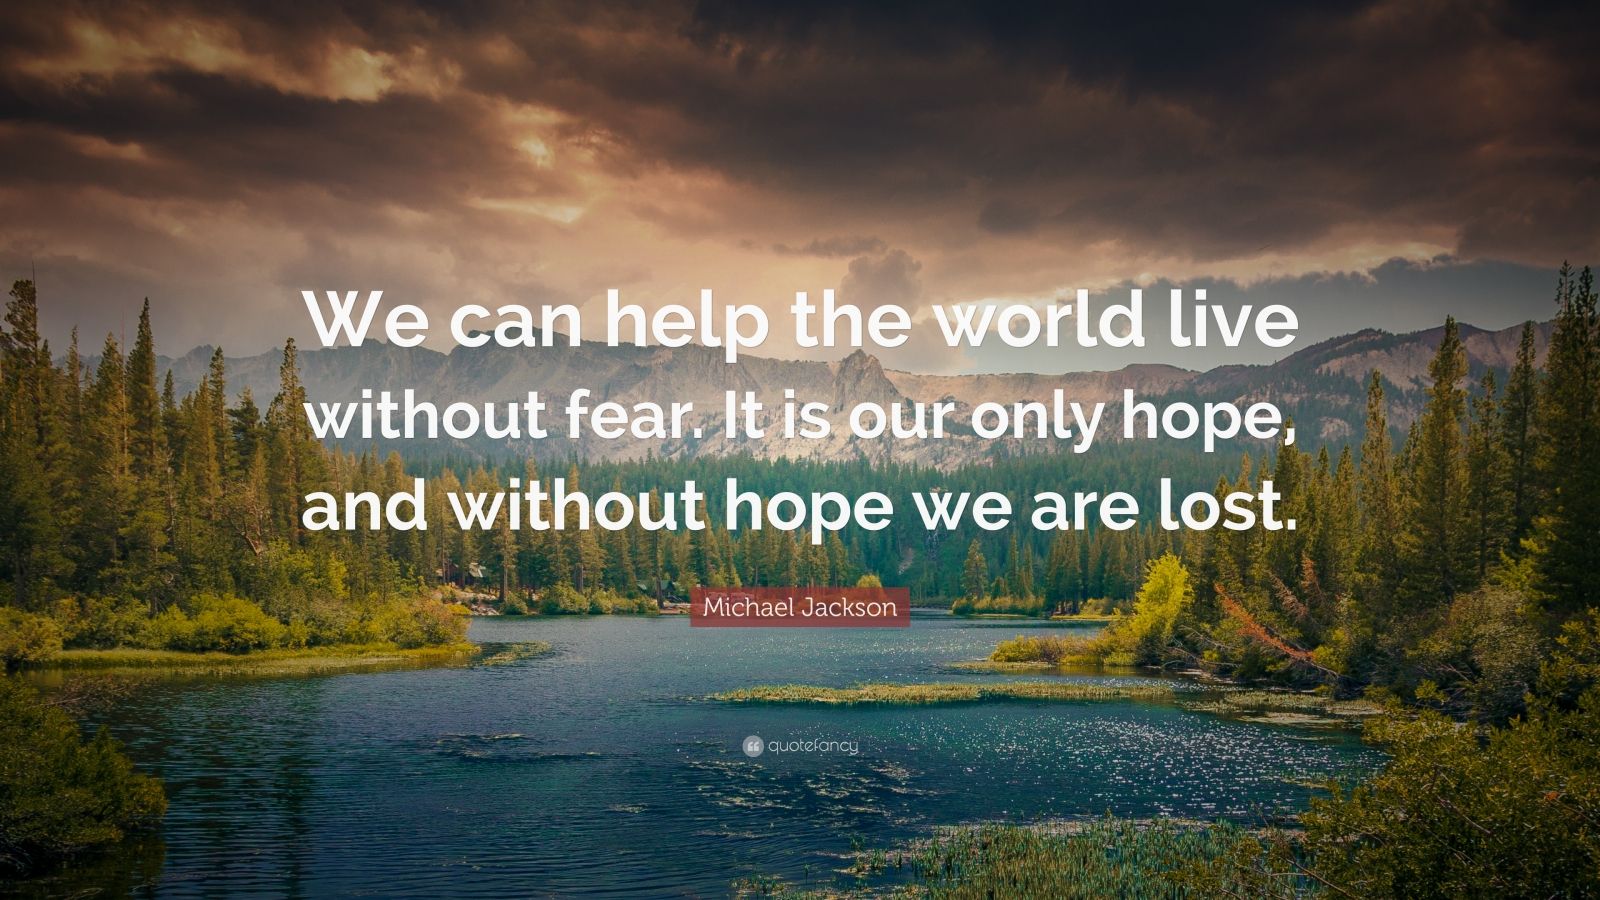 Michael Jackson Quote: “We can help the world live without fear. It is ...
